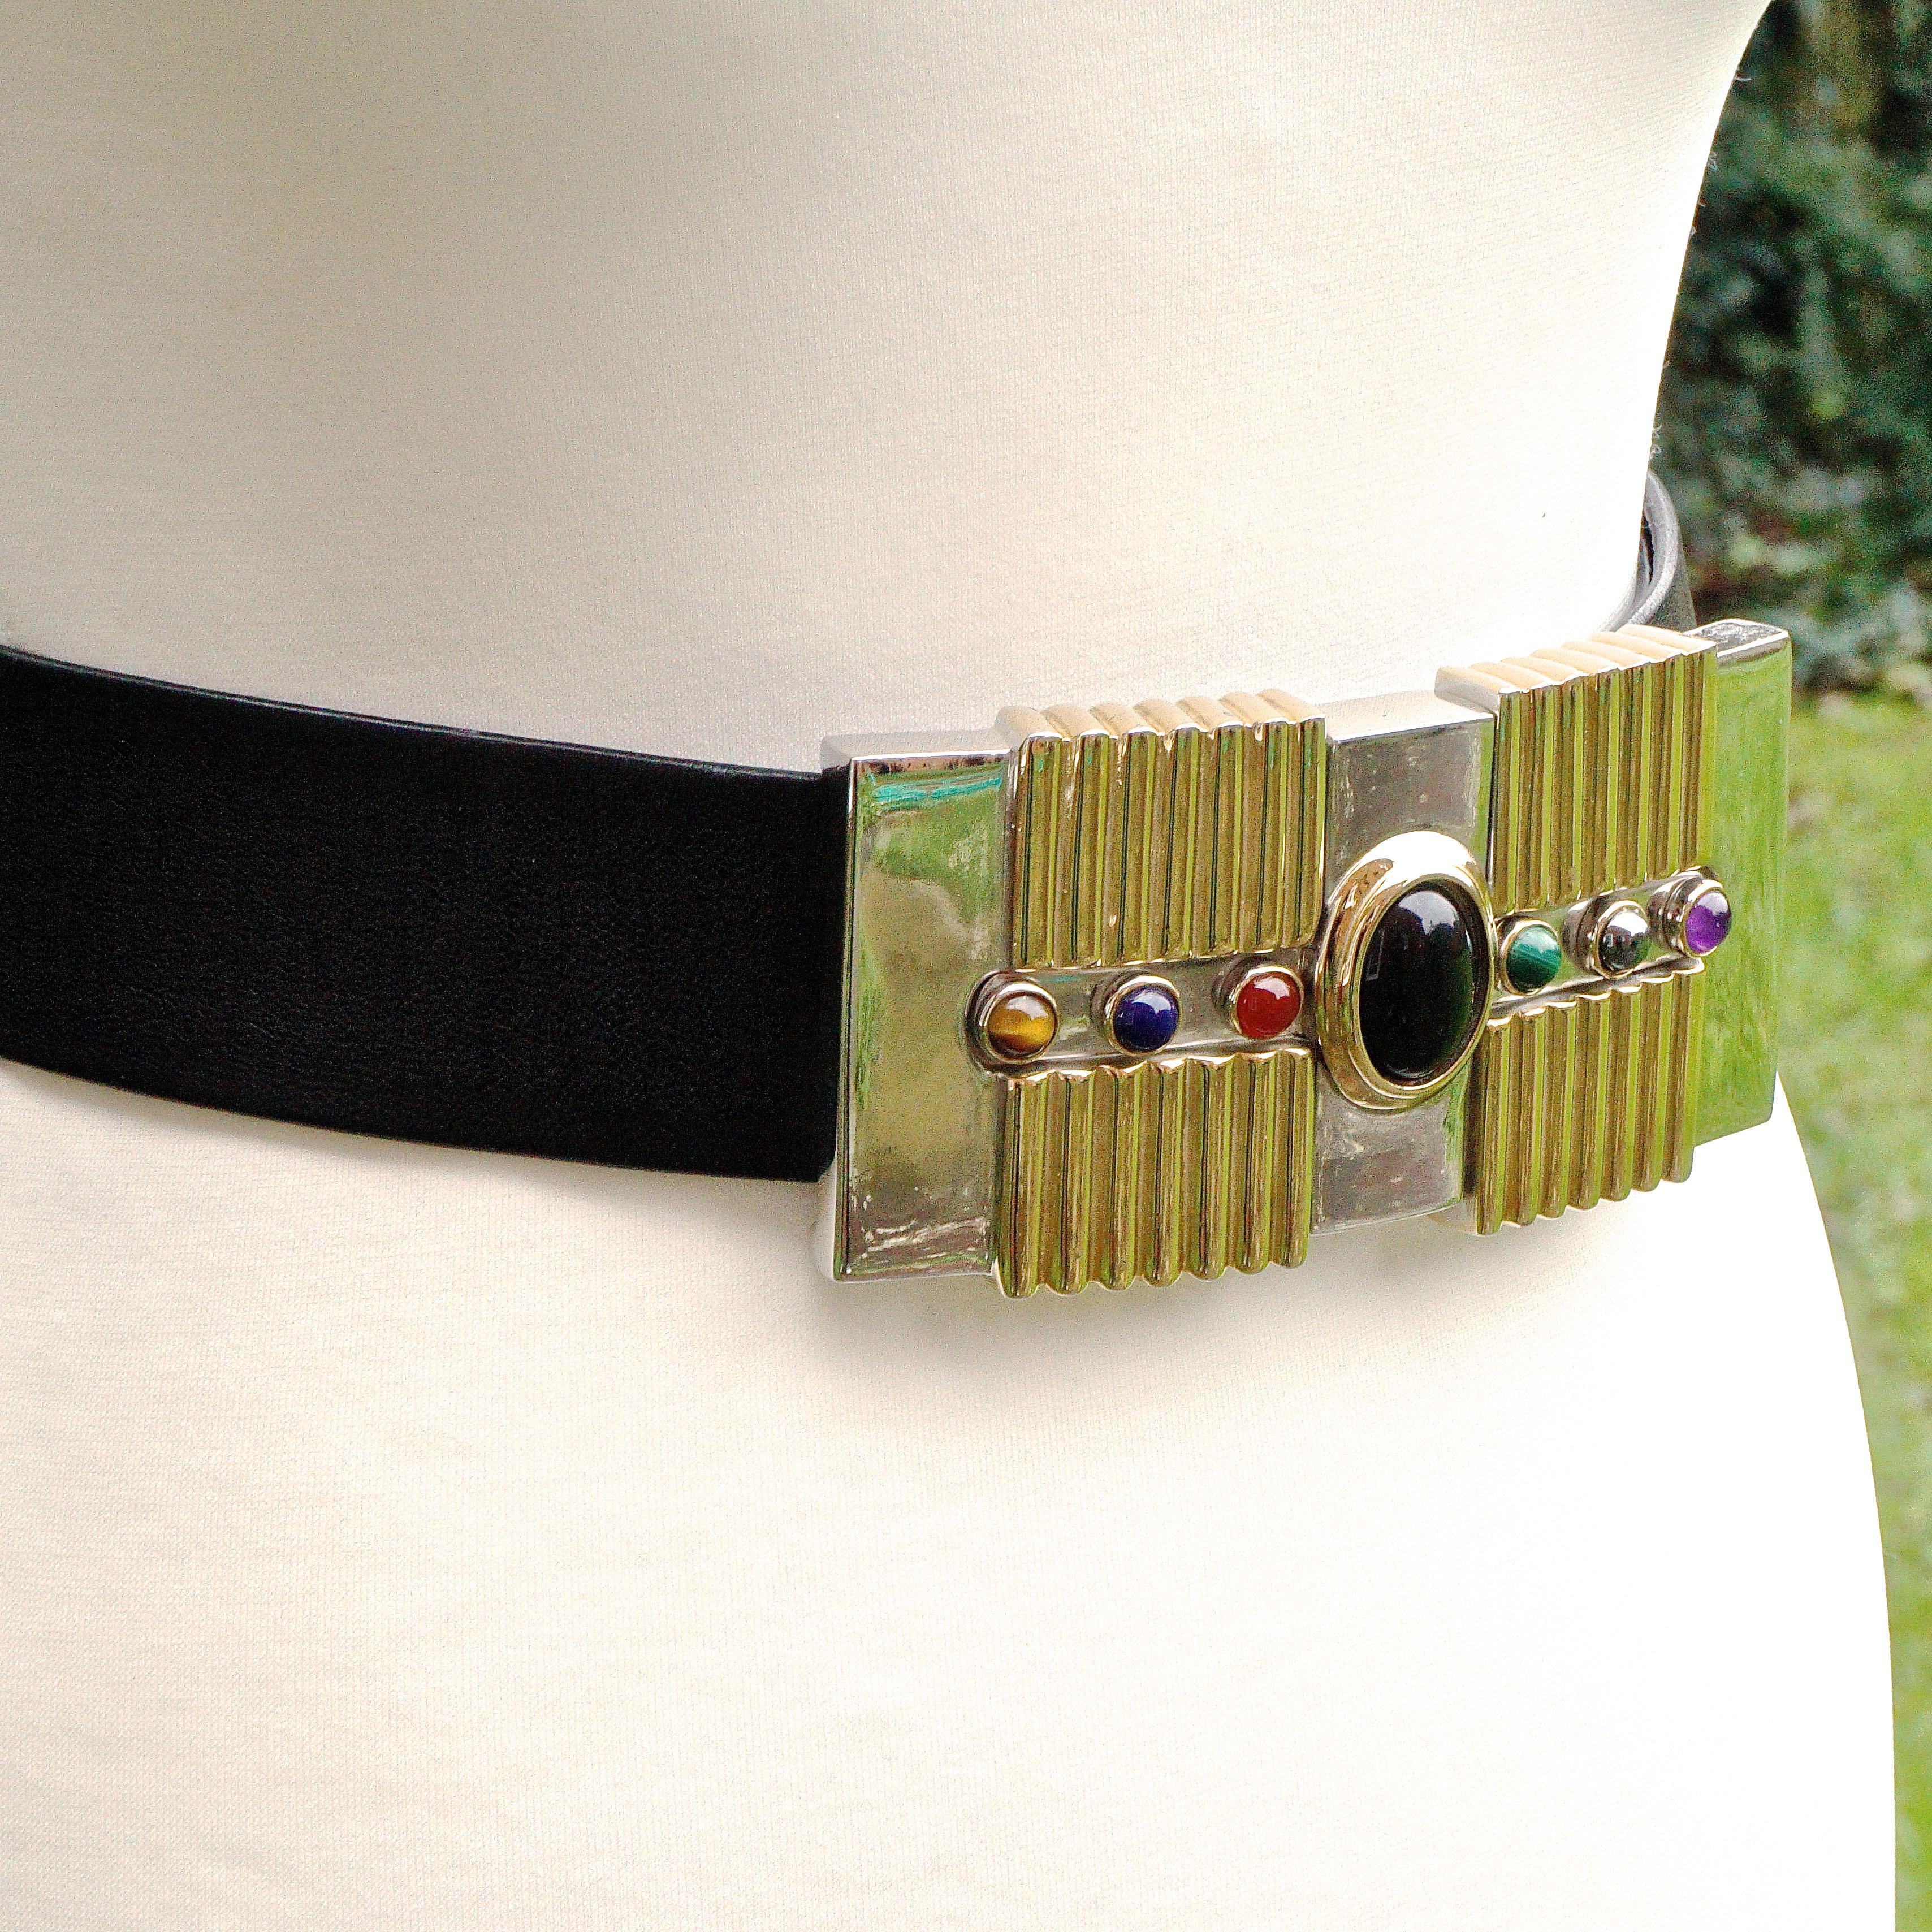 Alexis Kirk Black Leather Belt with Semi Precious Stones Buckle circa 1980s For Sale 3